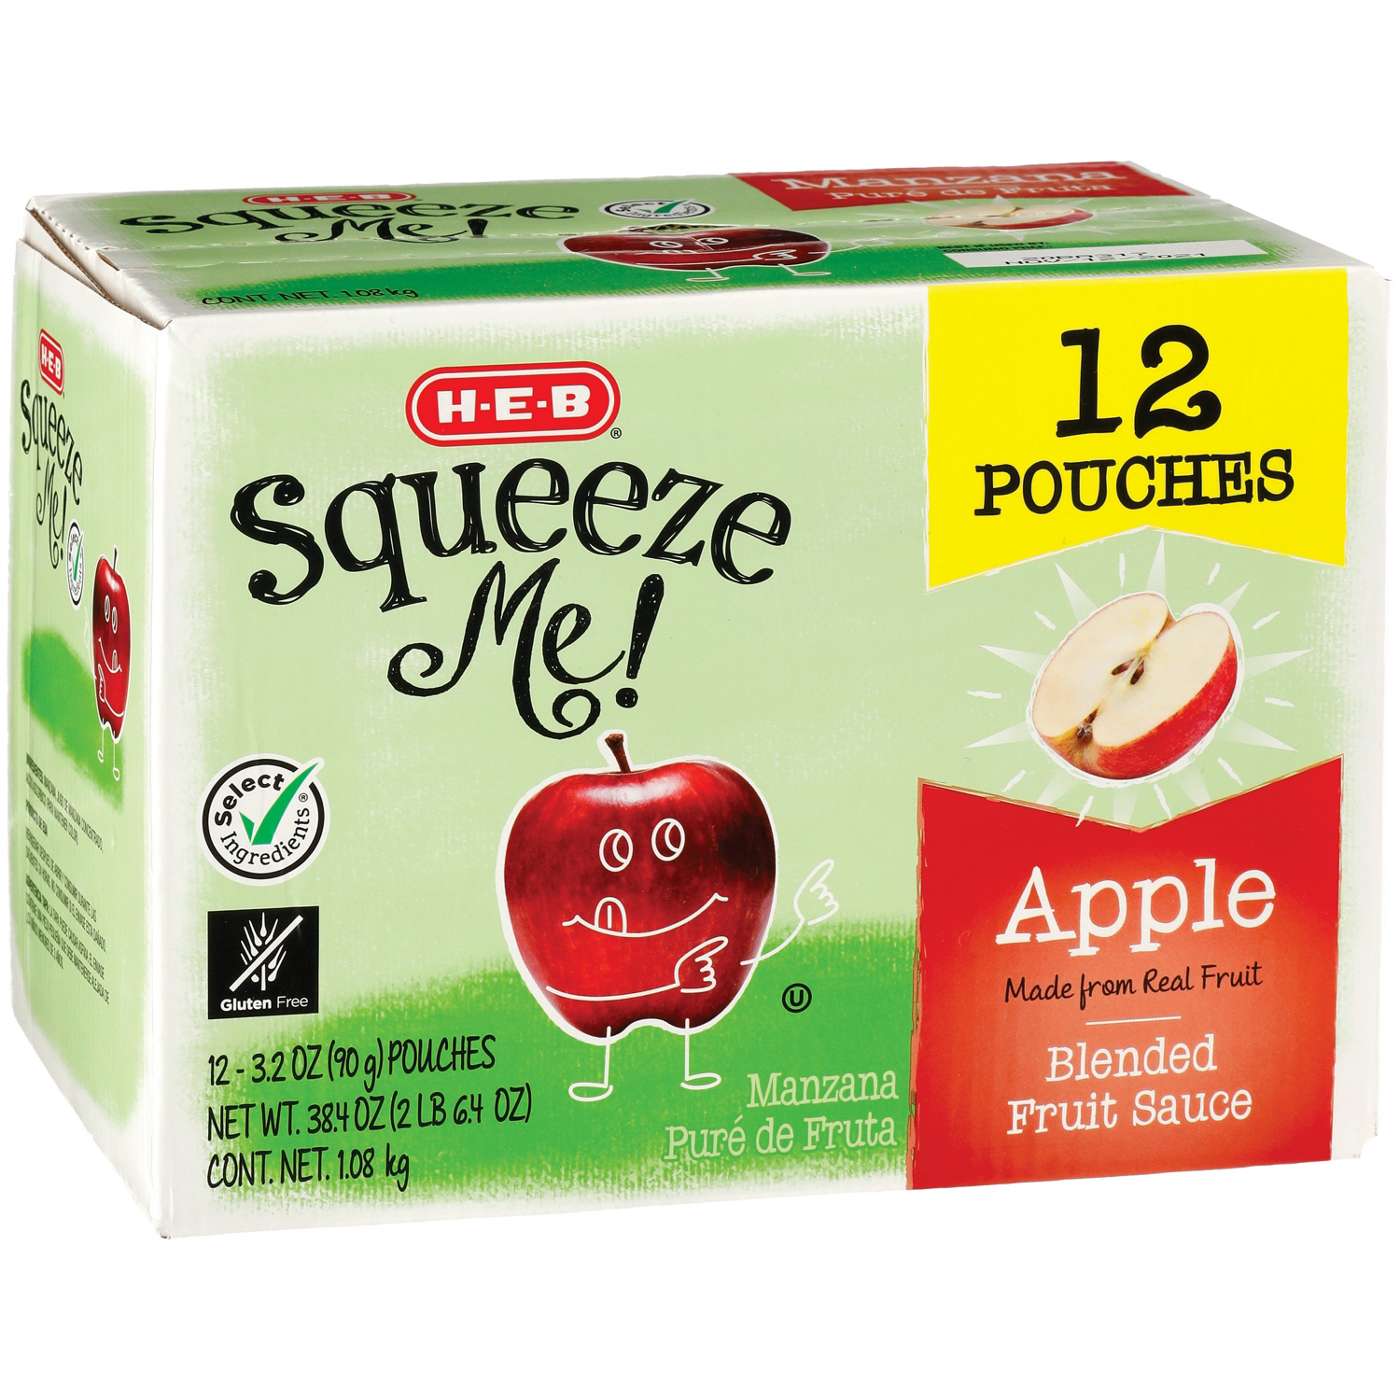 H-E-B Squeeze Me! Applesauce Pouches; image 1 of 2